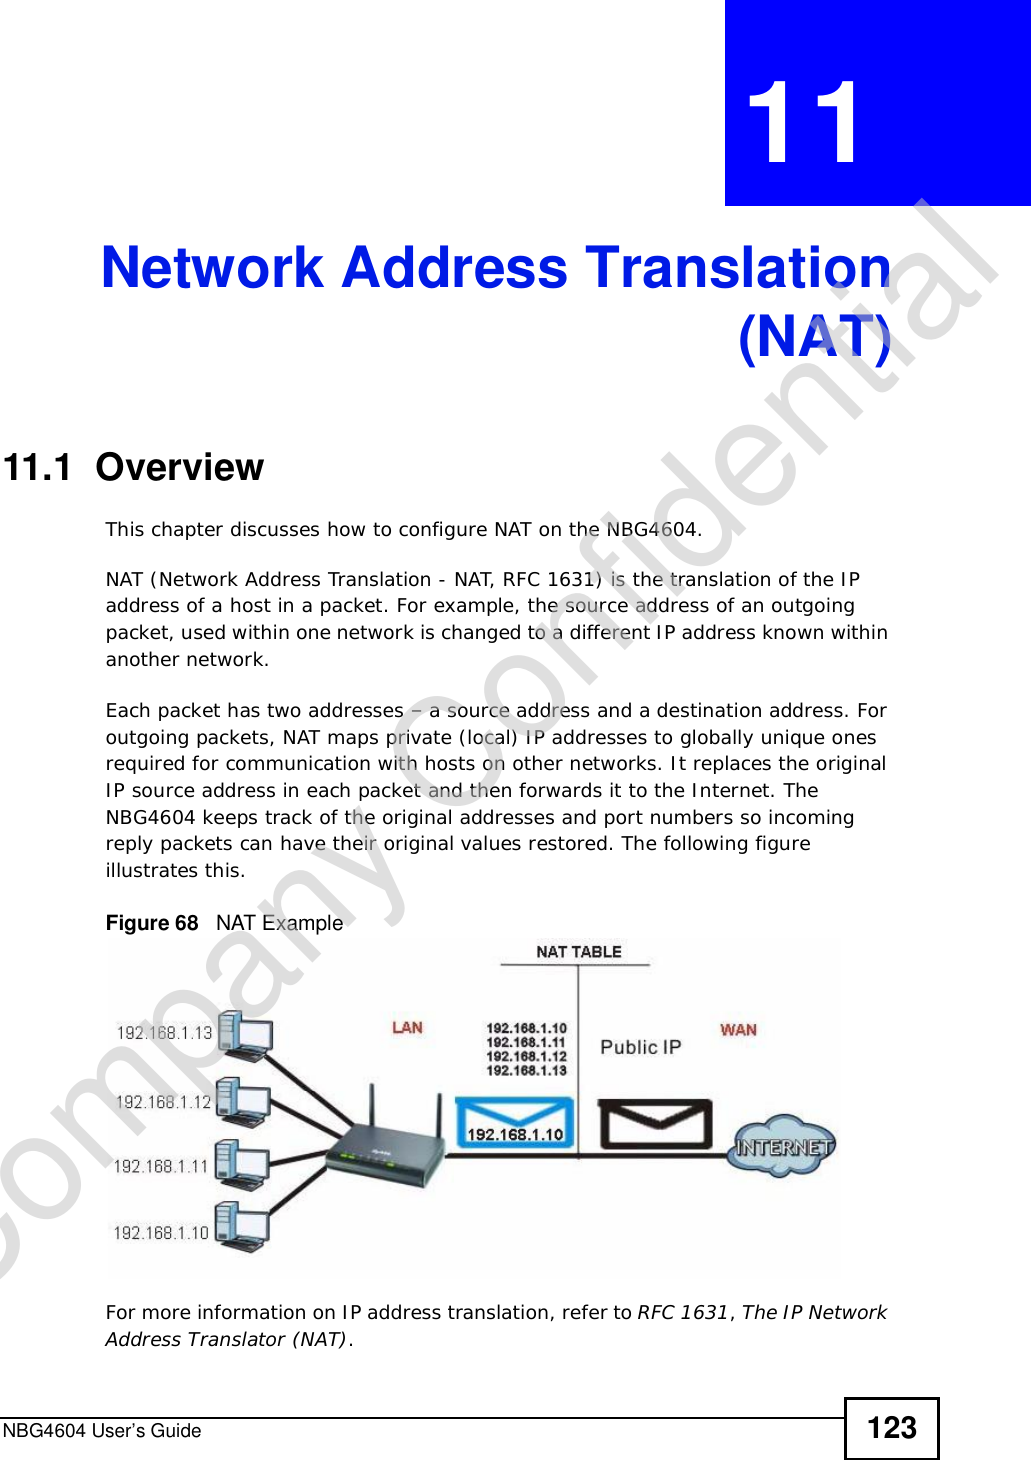 NBG4604 User’s Guide 123CHAPTER 11 Network Address Translation(NAT)11.1  Overview   This chapter discusses how to configure NAT on the NBG4604.NAT (Network Address Translation - NAT, RFC 1631) is the translation of the IP address of a host in a packet. For example, the source address of an outgoing packet, used within one network is changed to a different IP address known within another network.Each packet has two addresses – a source address and a destination address. For outgoing packets, NAT maps private (local) IP addresses to globally unique ones required for communication with hosts on other networks. It replaces the original IP source address in each packet and then forwards it to the Internet. The NBG4604 keeps track of the original addresses and port numbers so incoming reply packets can have their original values restored. The following figure illustrates this.Figure 68   NAT ExampleFor more information on IP address translation, refer to RFC 1631,The IP Network Address Translator (NAT).Company Confidential